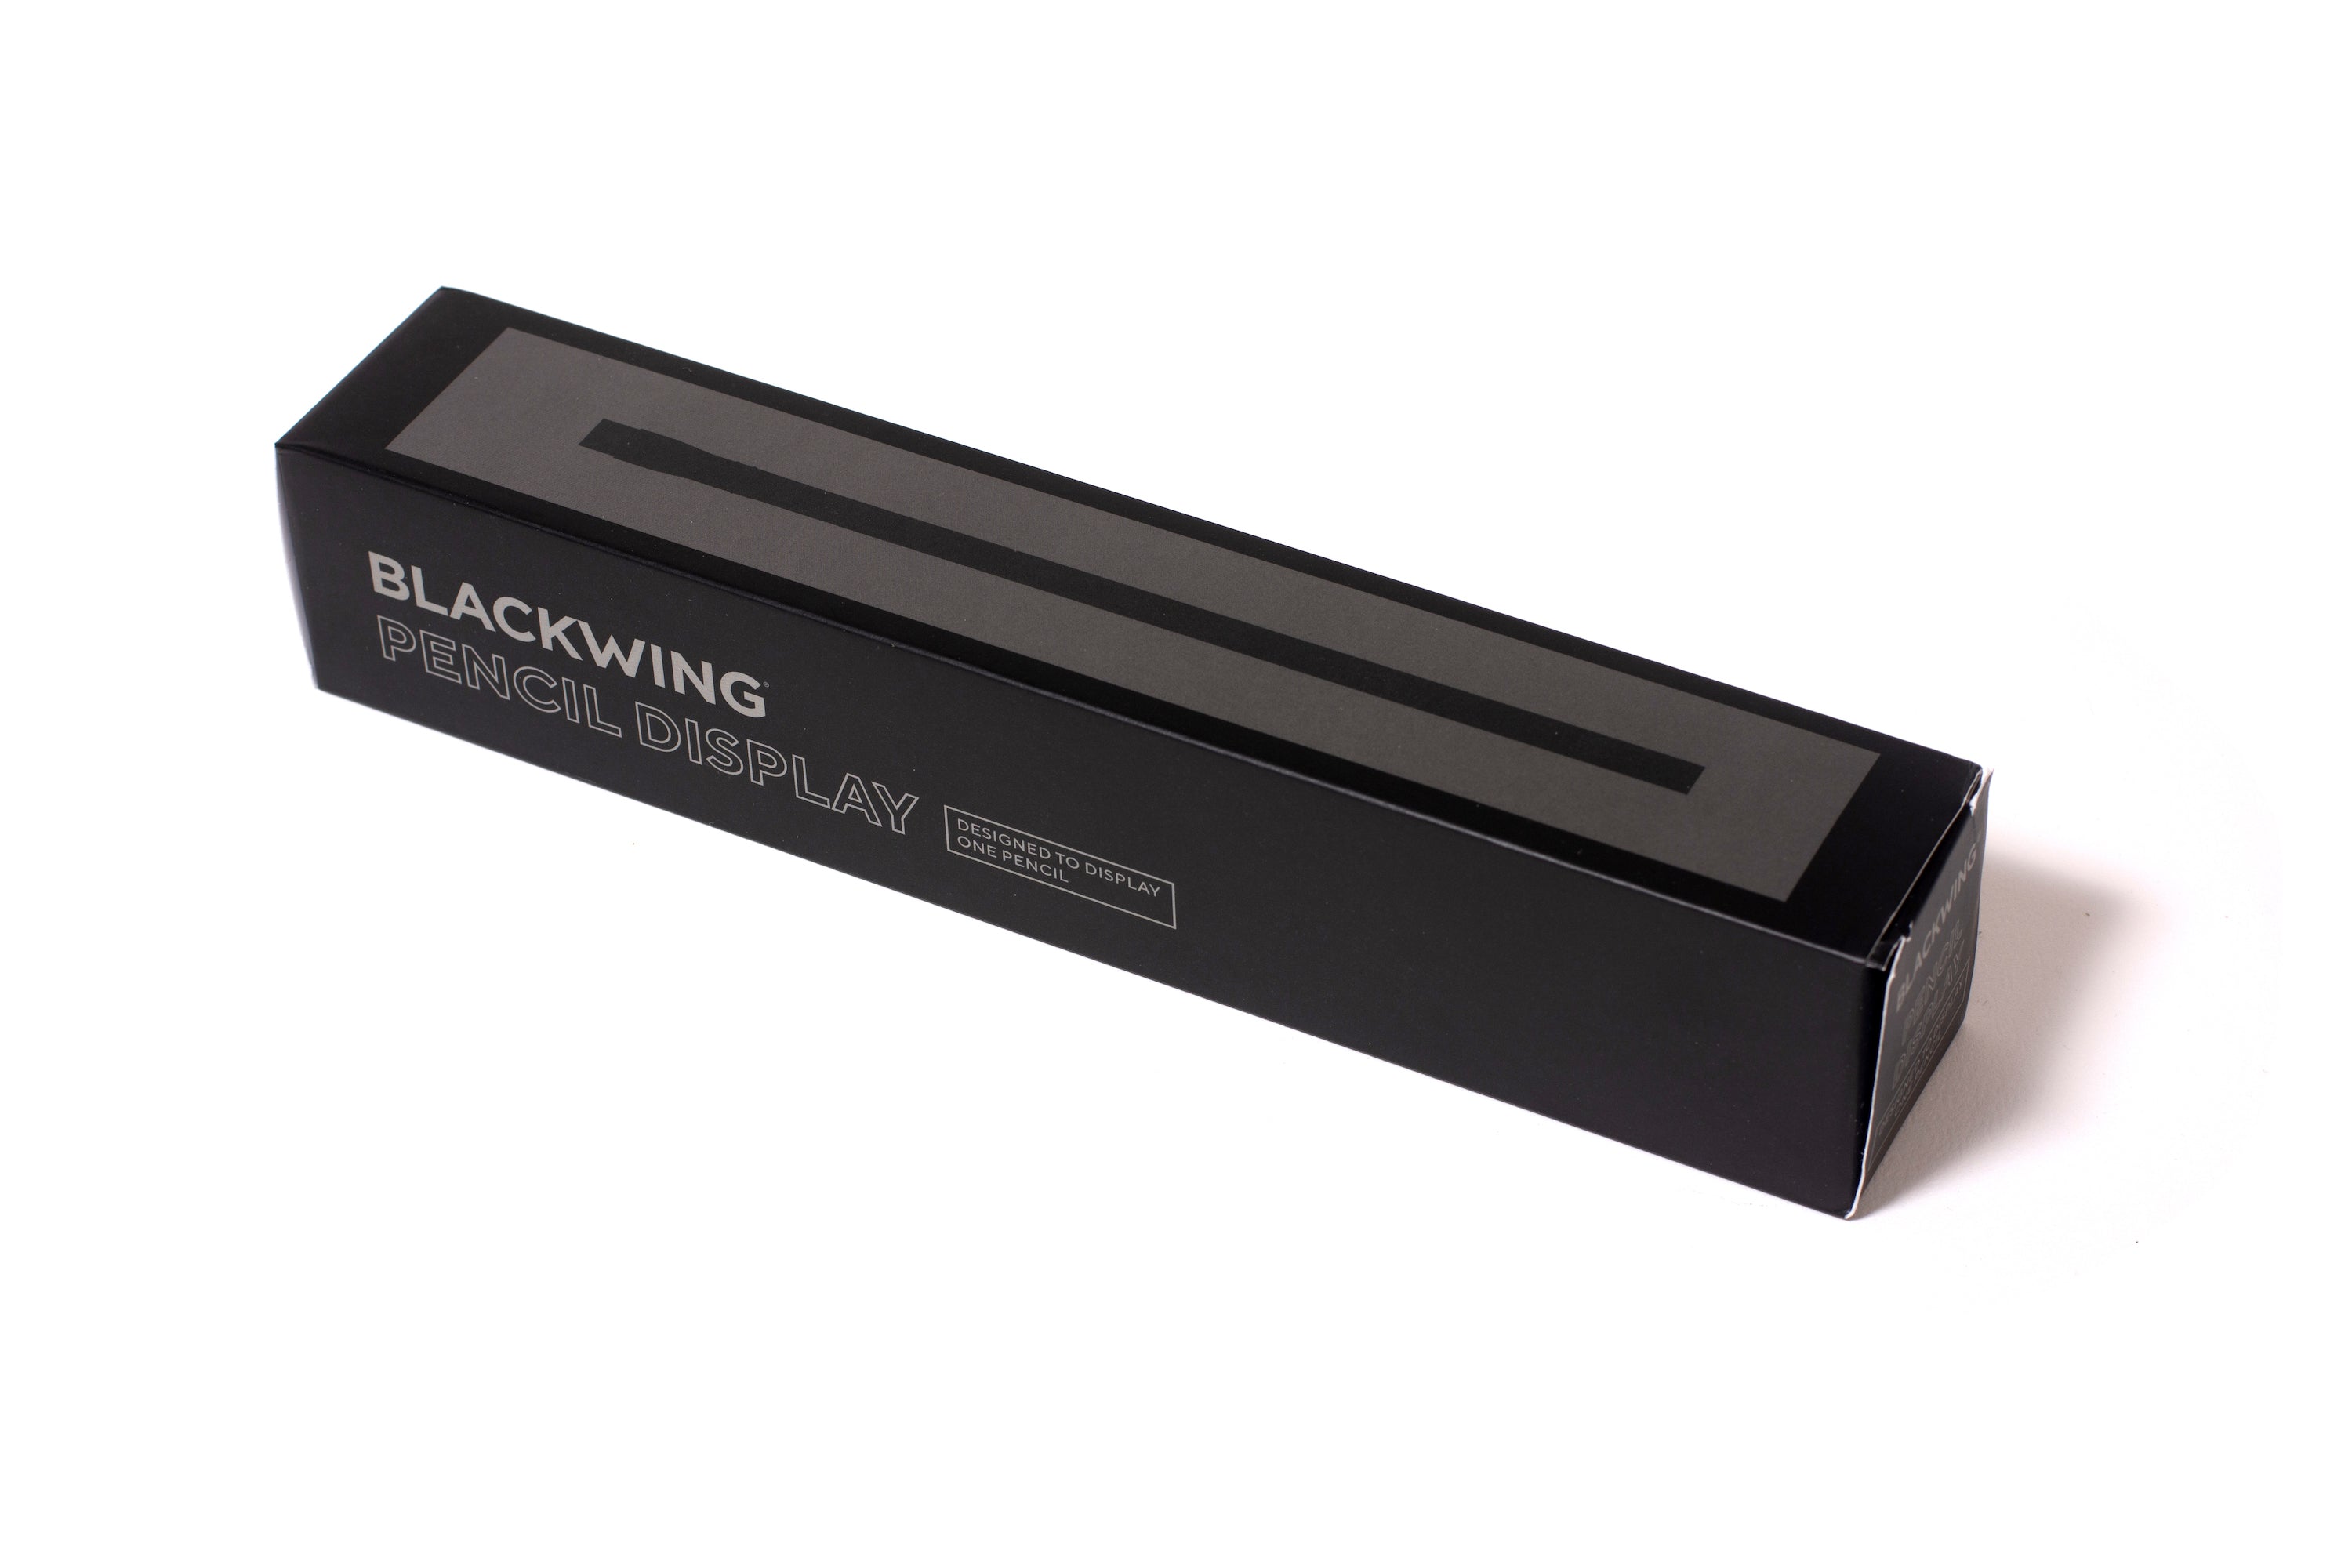 A Blackwing Flat Single Pencil Display with grey text.